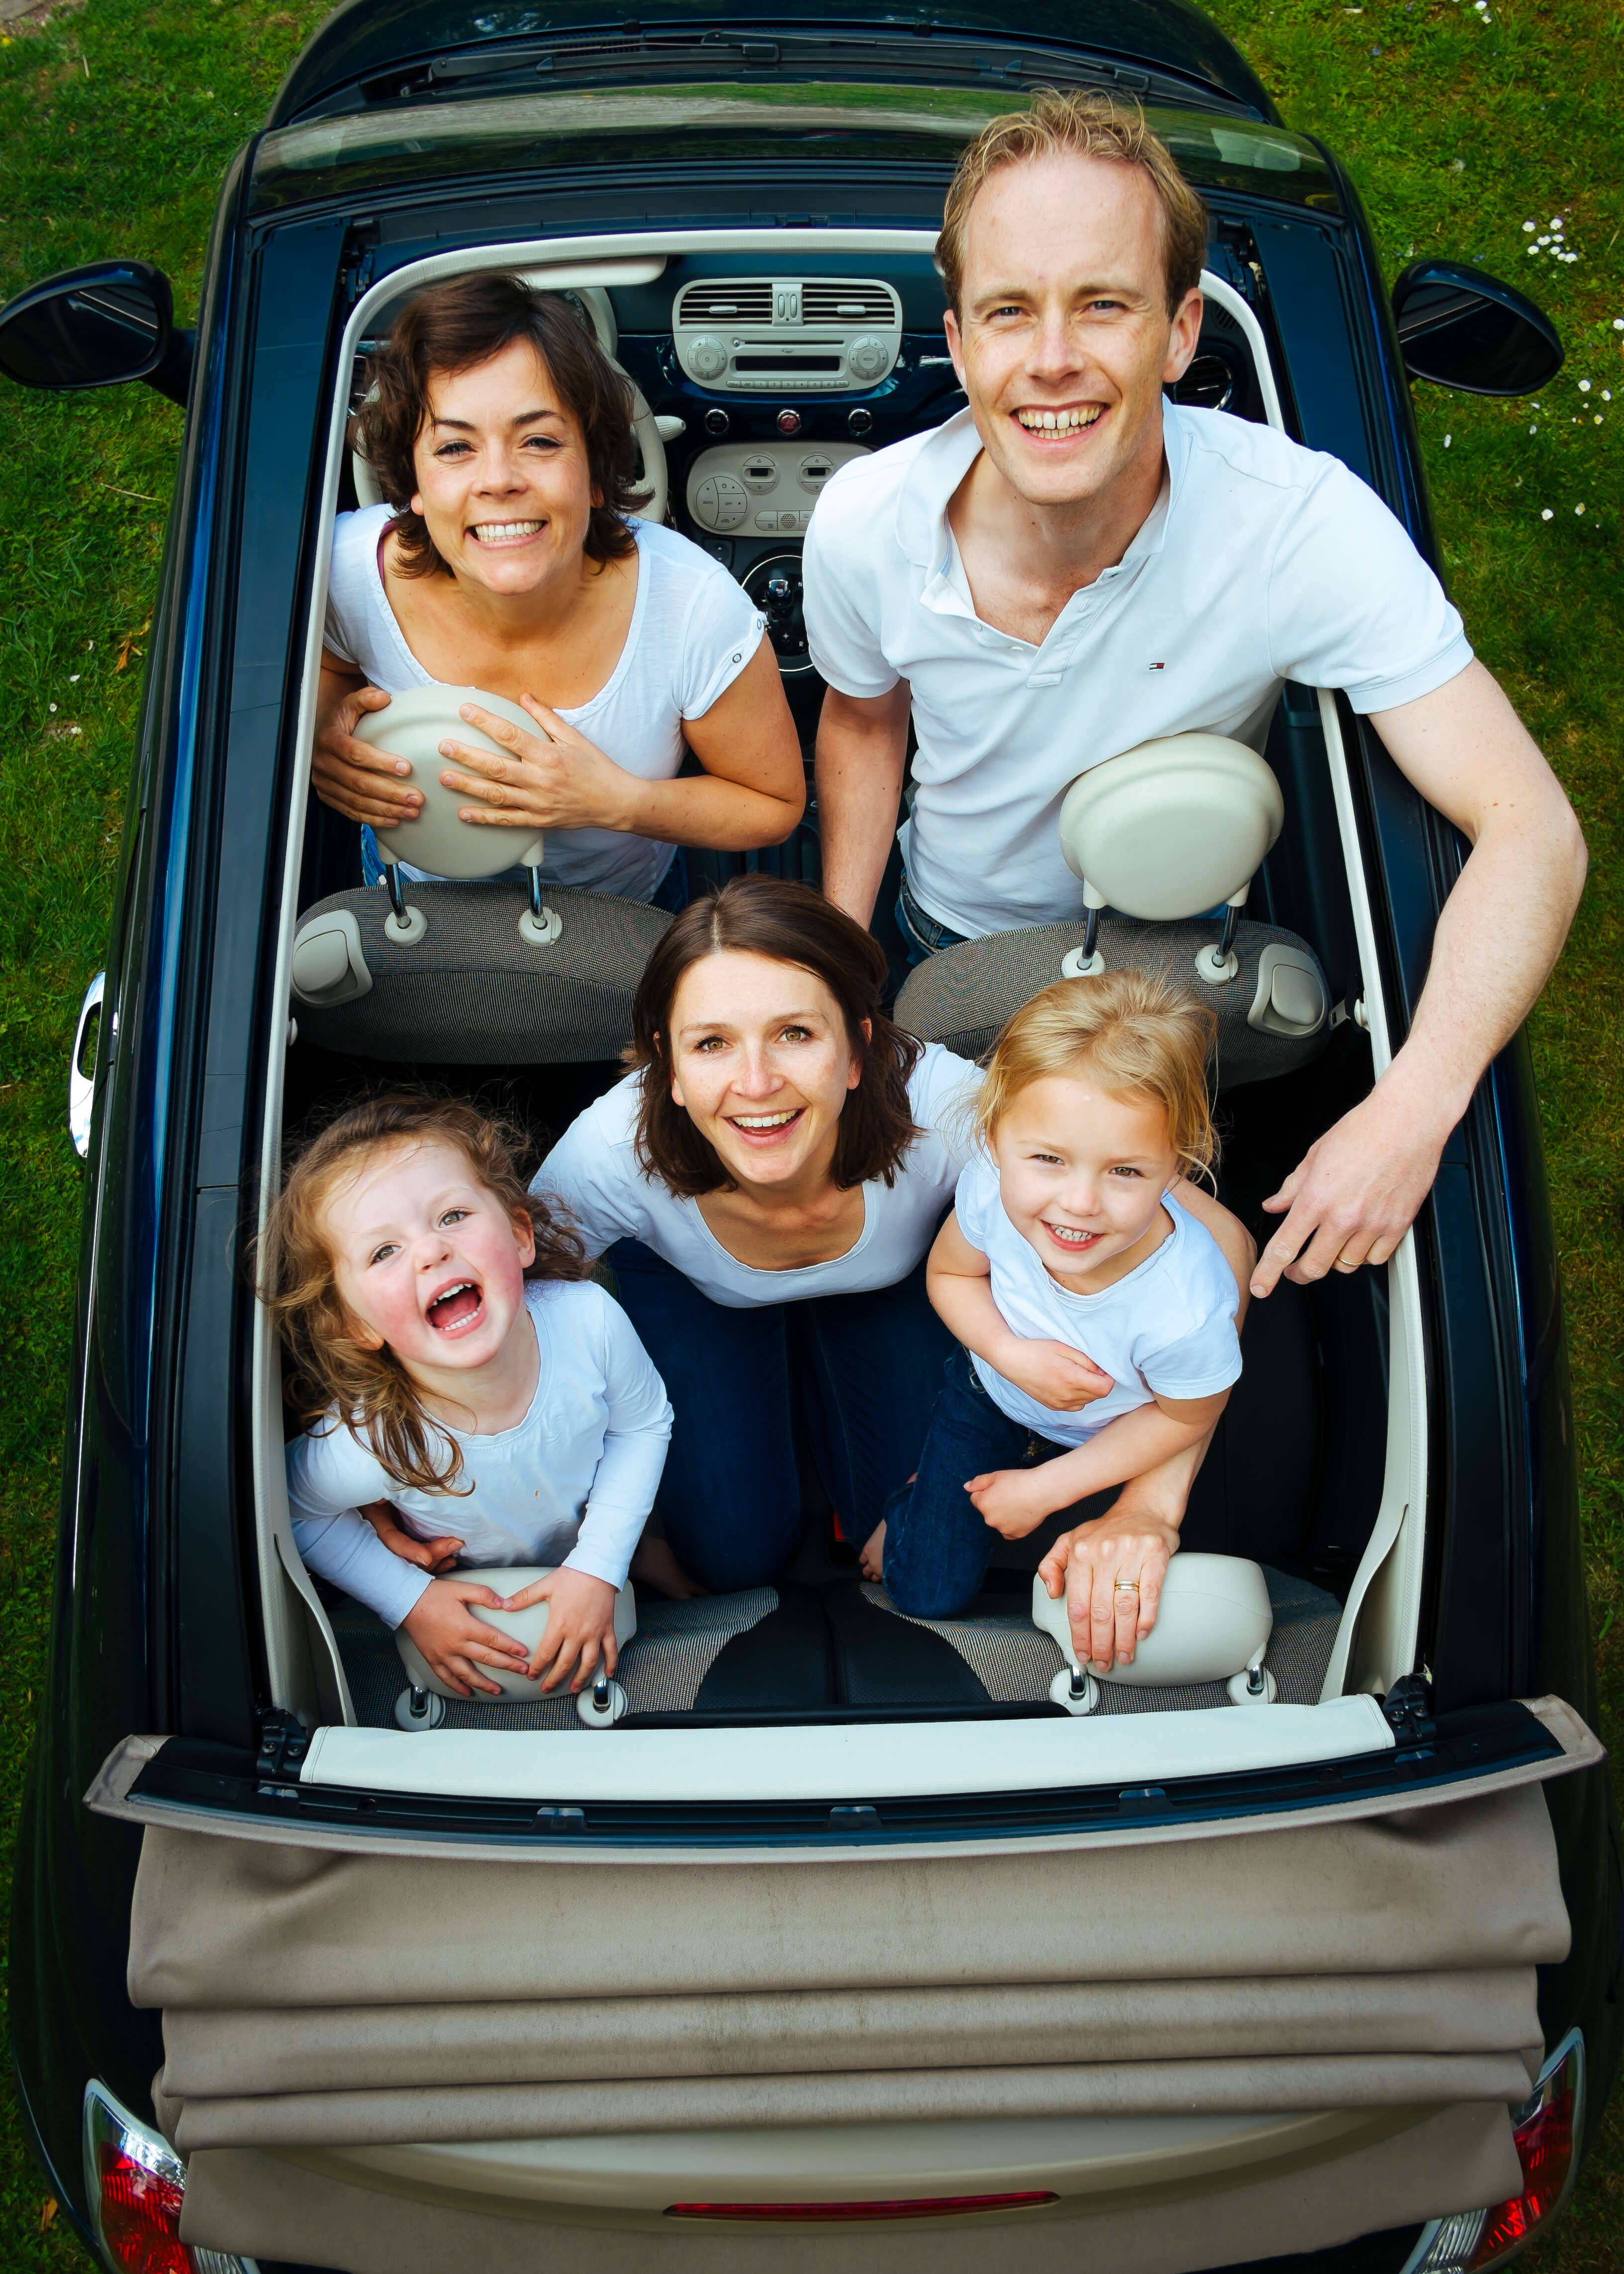 What is the best family car?